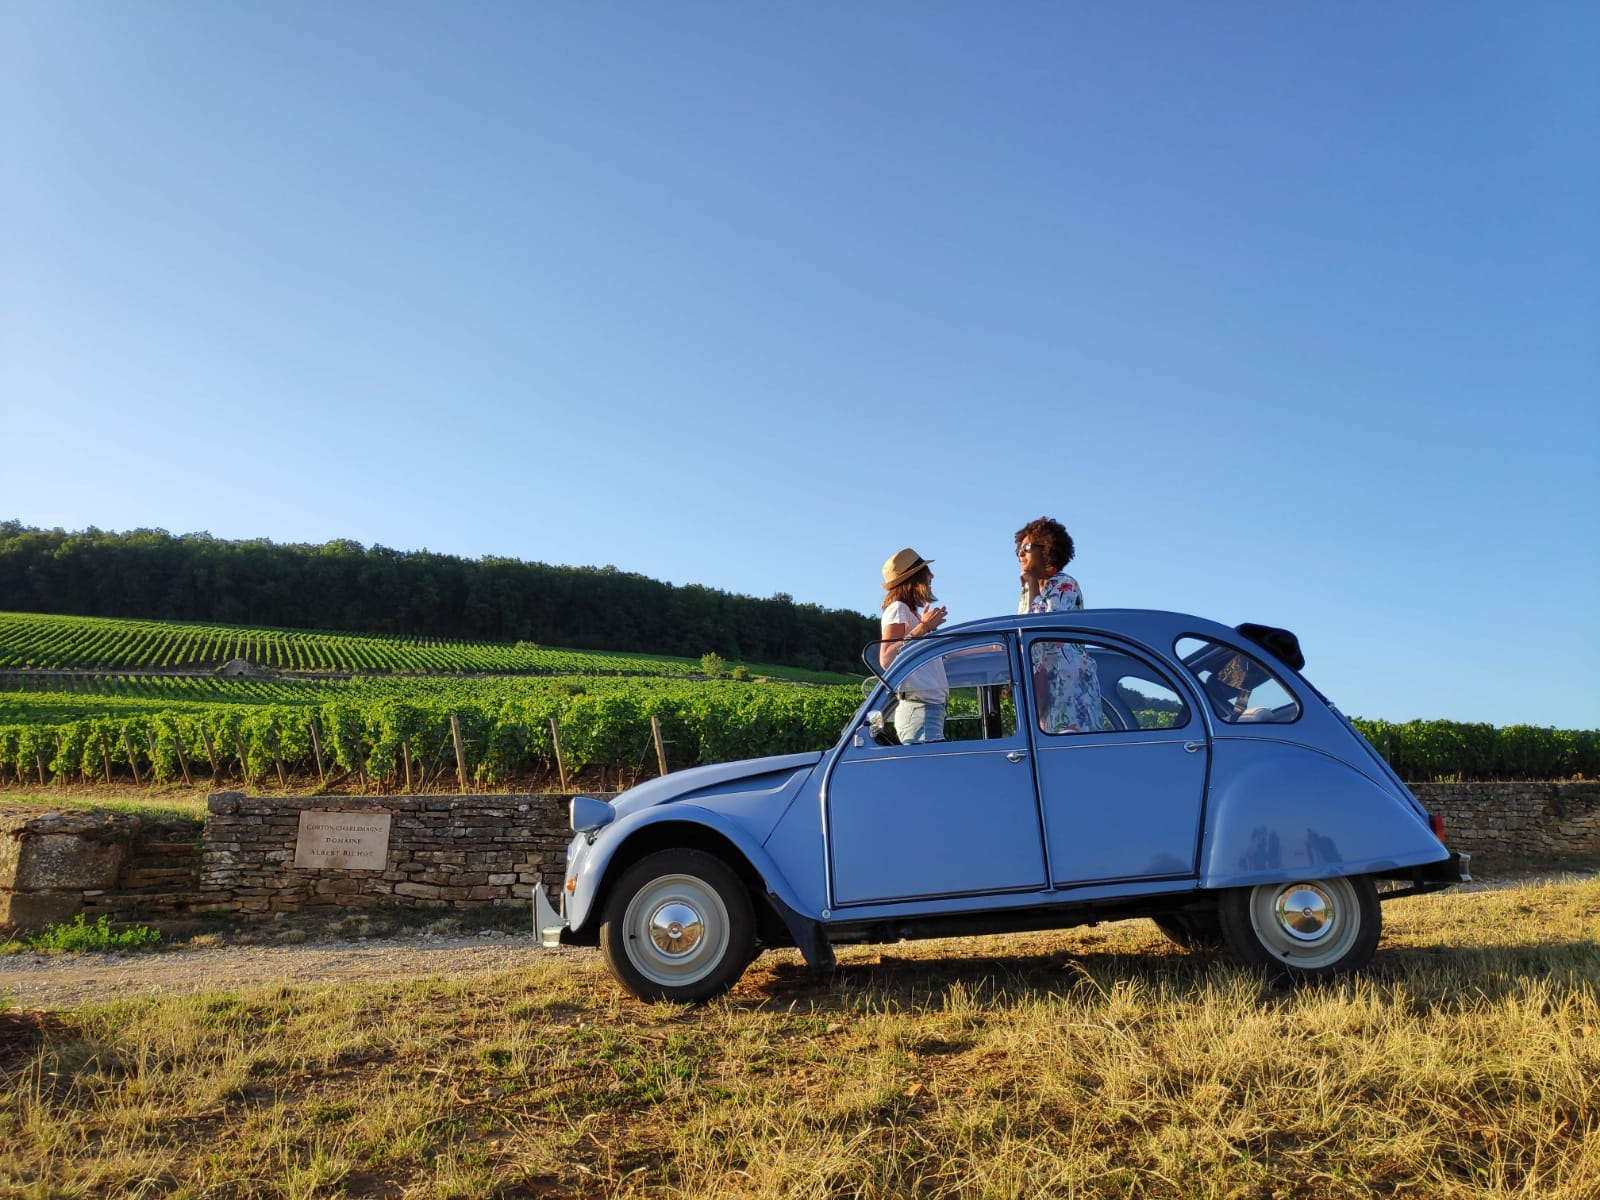 Live a unique experience in the vineyard of Burgundy